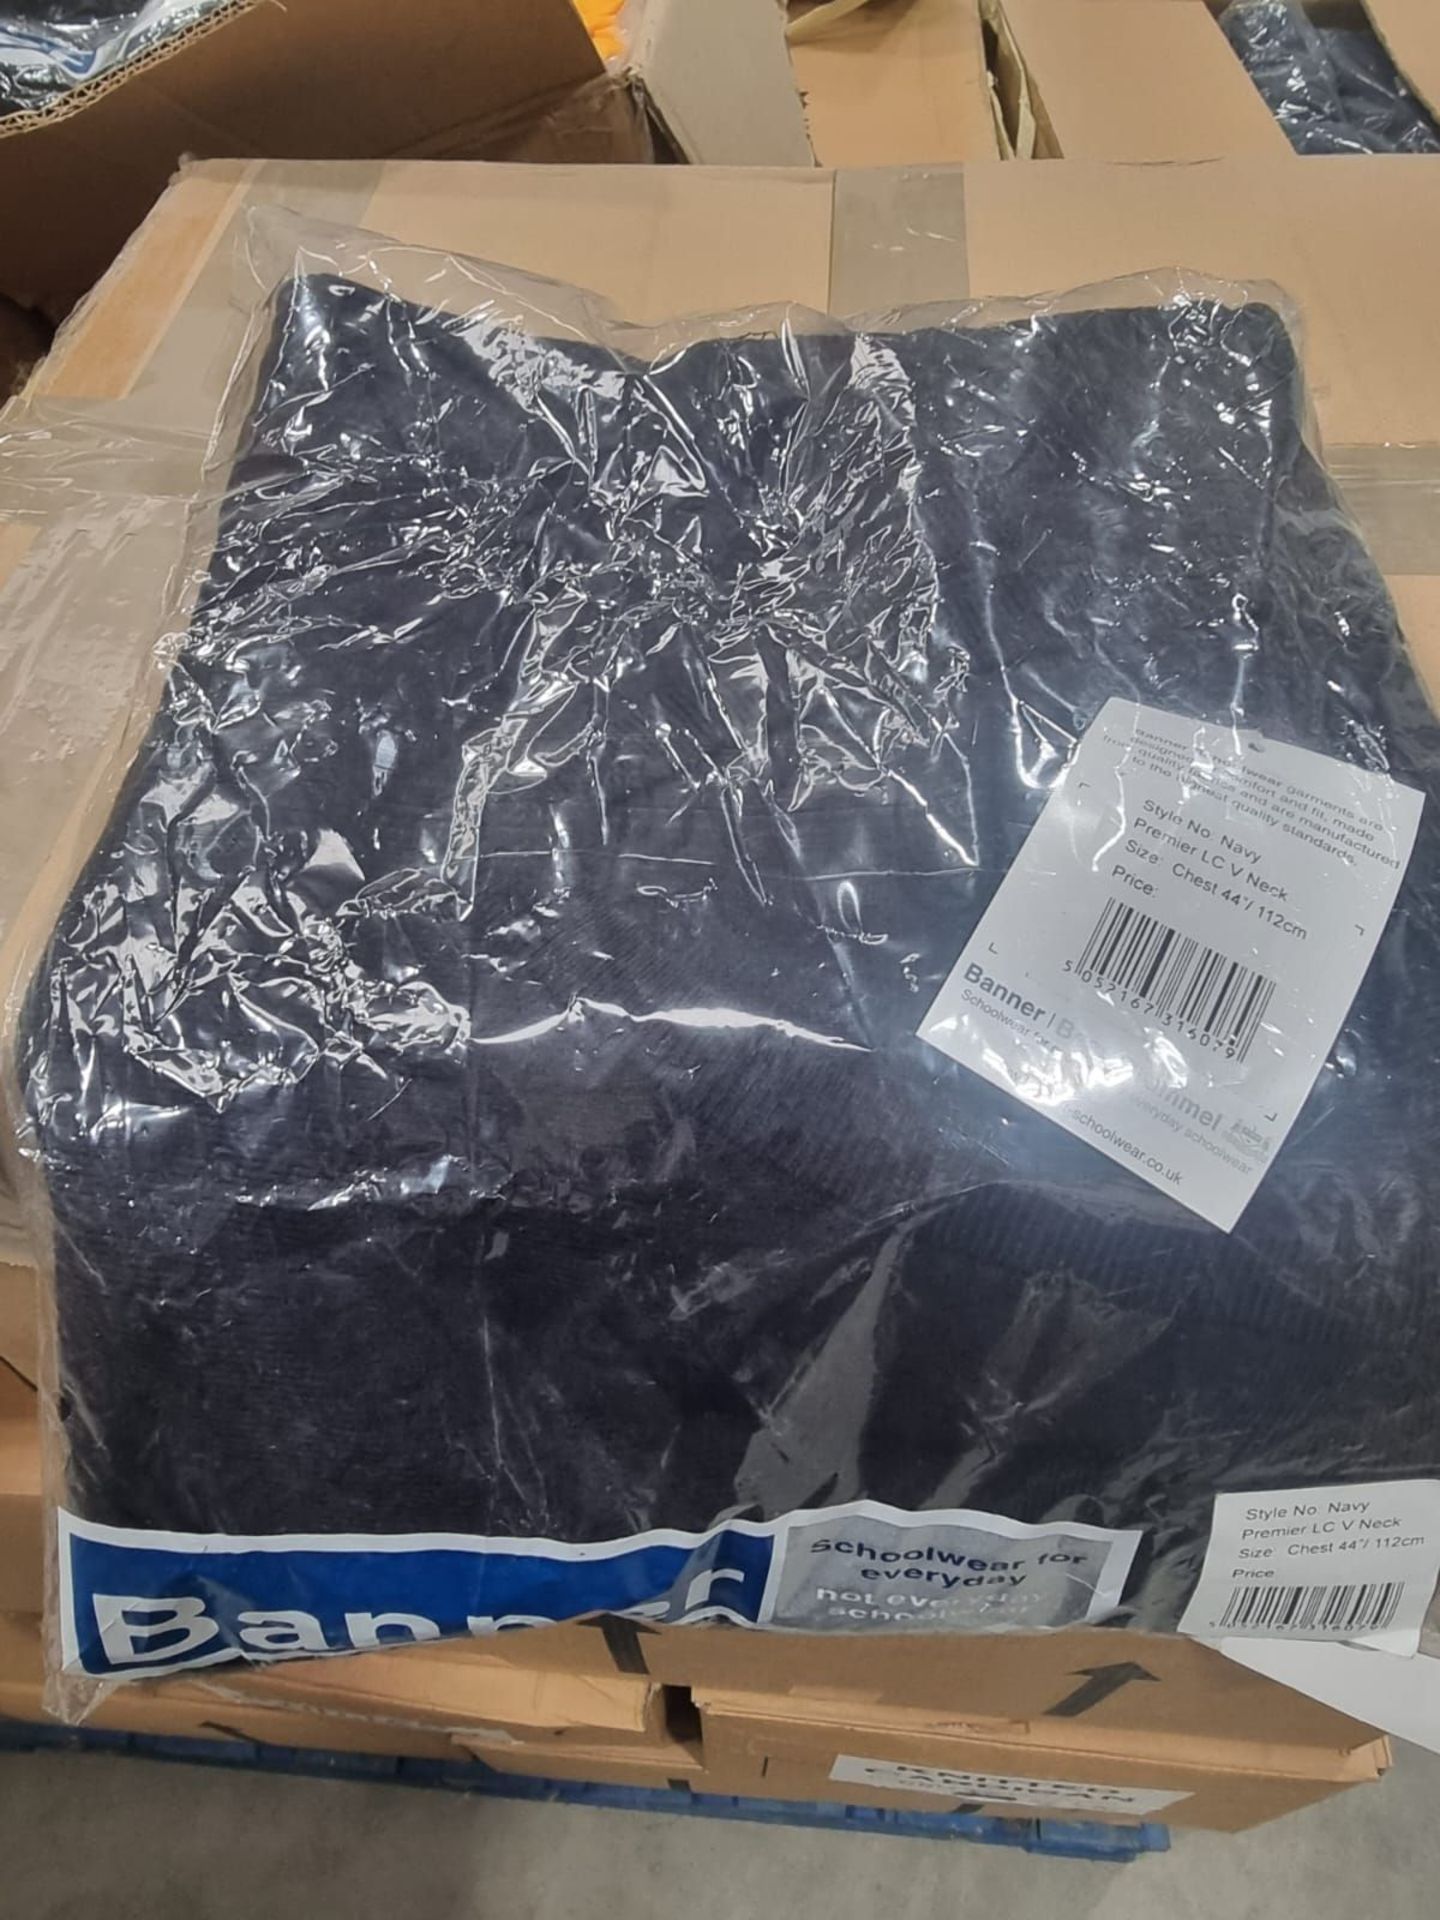 PALLET TO CONTAIN A LARGE QUANTITY OF NEW CLOTHING GOODS. MAY INCLUDE ITEMS SUCH AS: T-SHIRTS, - Image 12 of 28